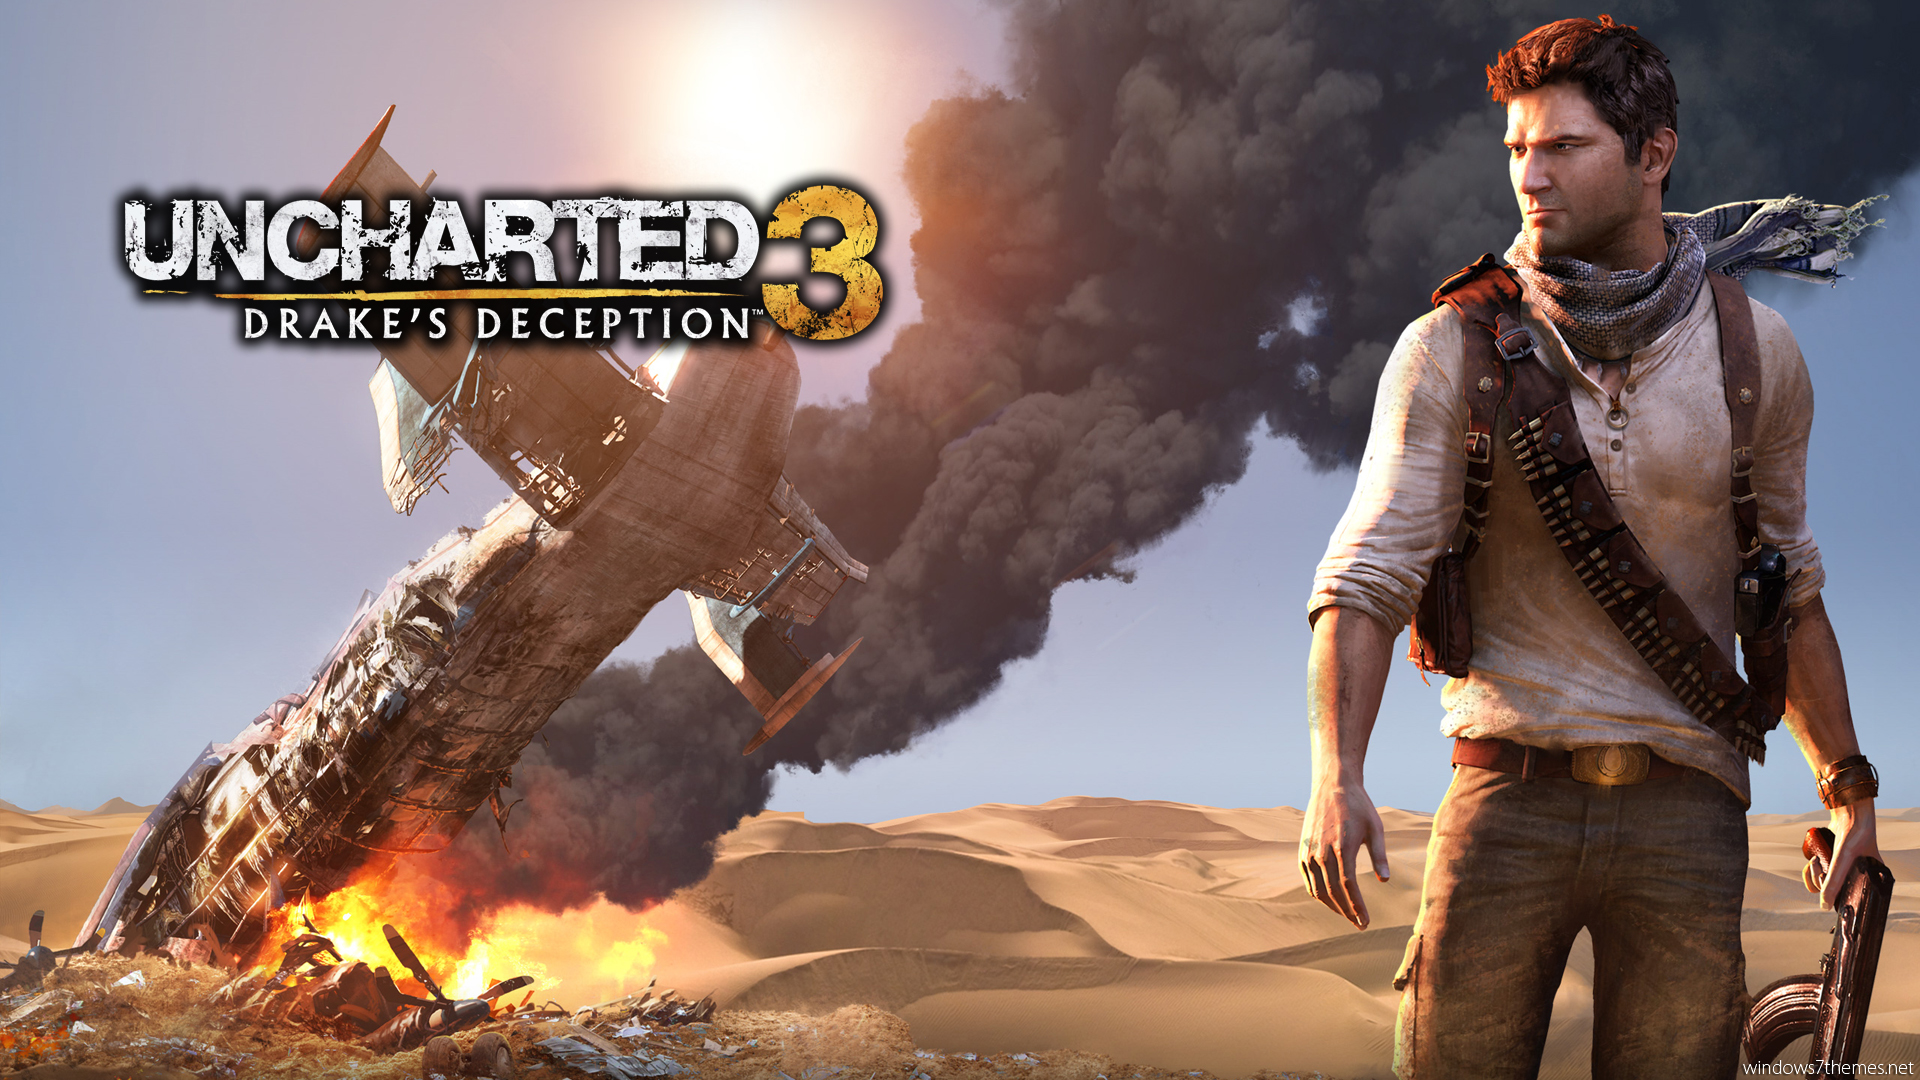 SCEE Confirms Uncharted 3 Will Grant Access To The Starhawk Beta For EU Customers